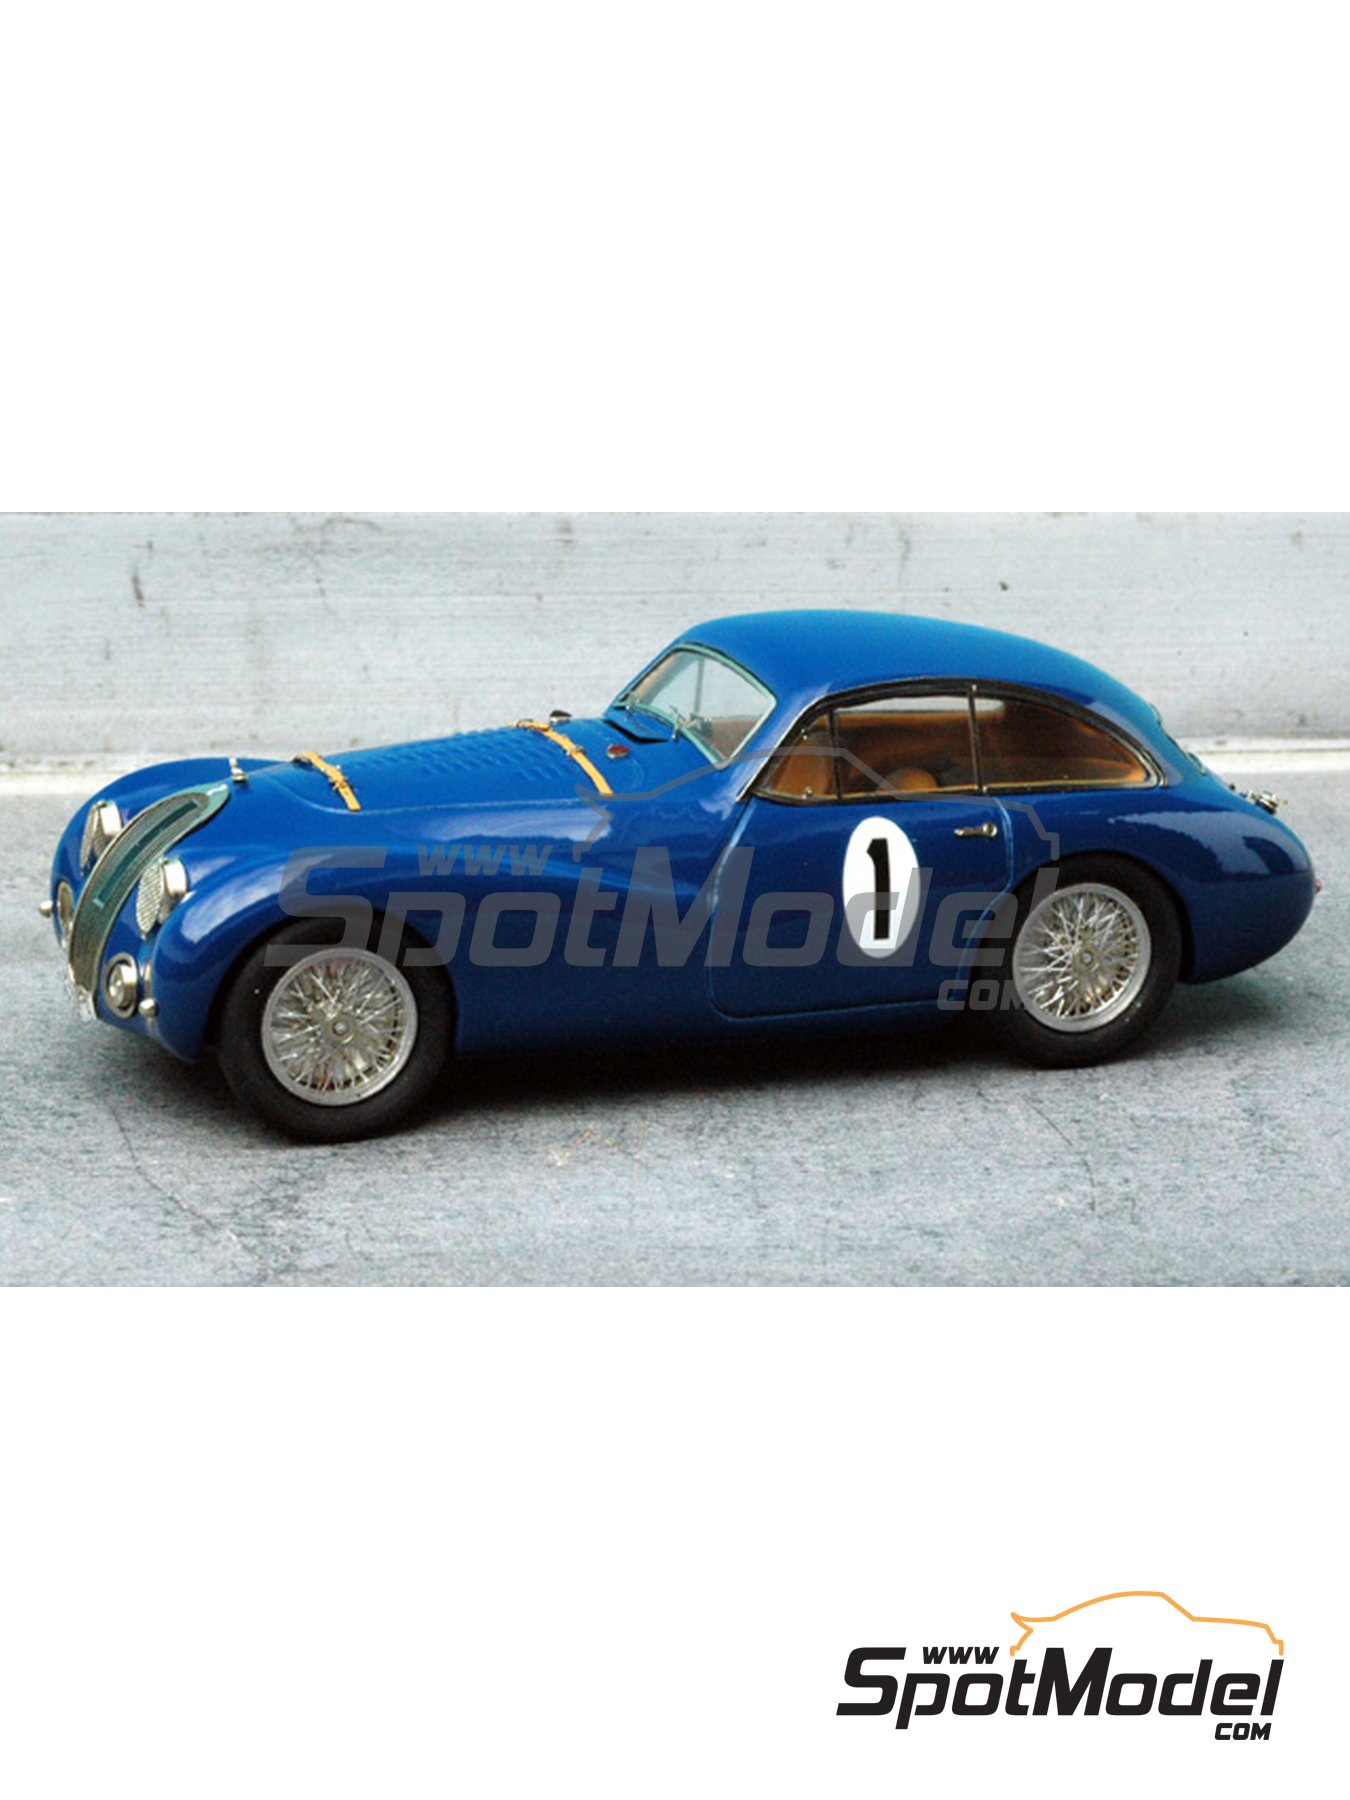 Talbot Lago Grand Sport Coupe - 24 Hours Le Mans 1949 and 1950. Car scale  model kit in 1/43 scale manufactured by Renaissance Models (ref. 43-49, also